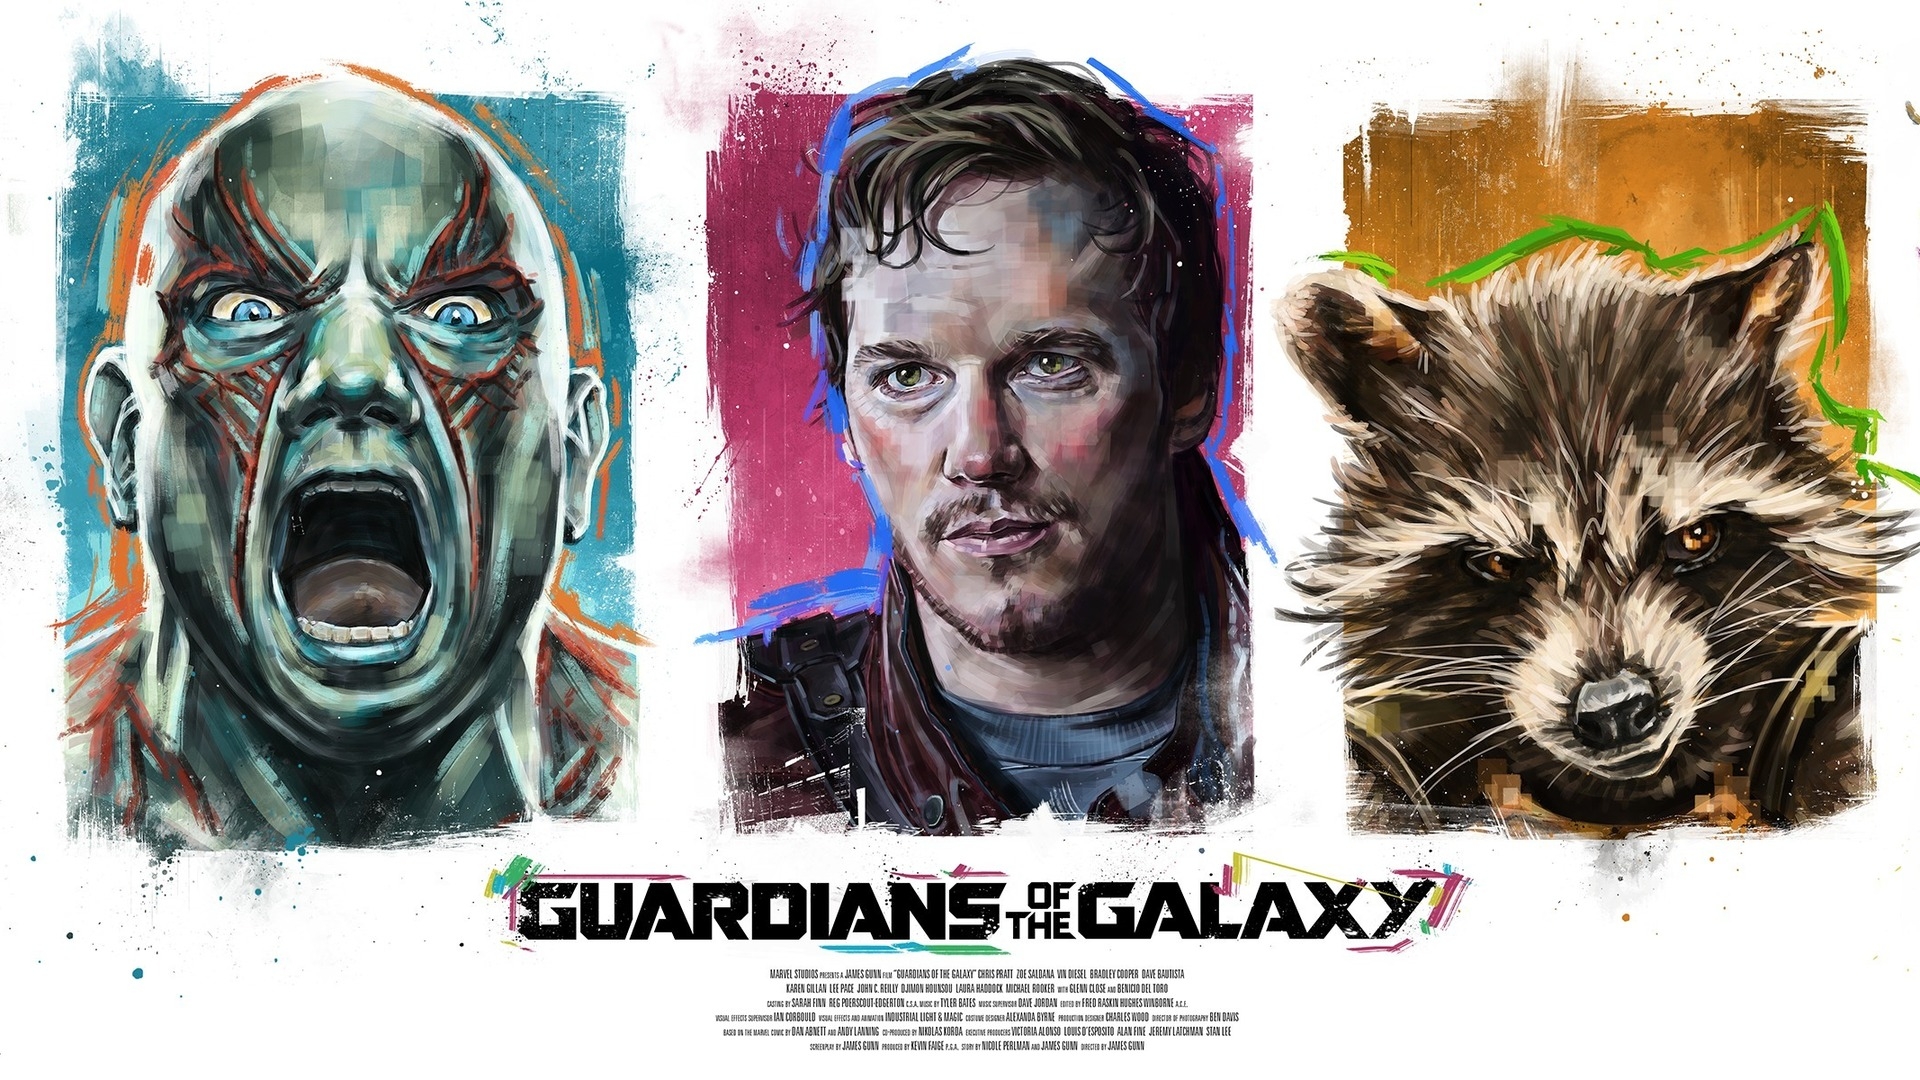 Guardians of the Galaxy Poster Artwork for 1920 x 1080 HDTV 1080p resolution